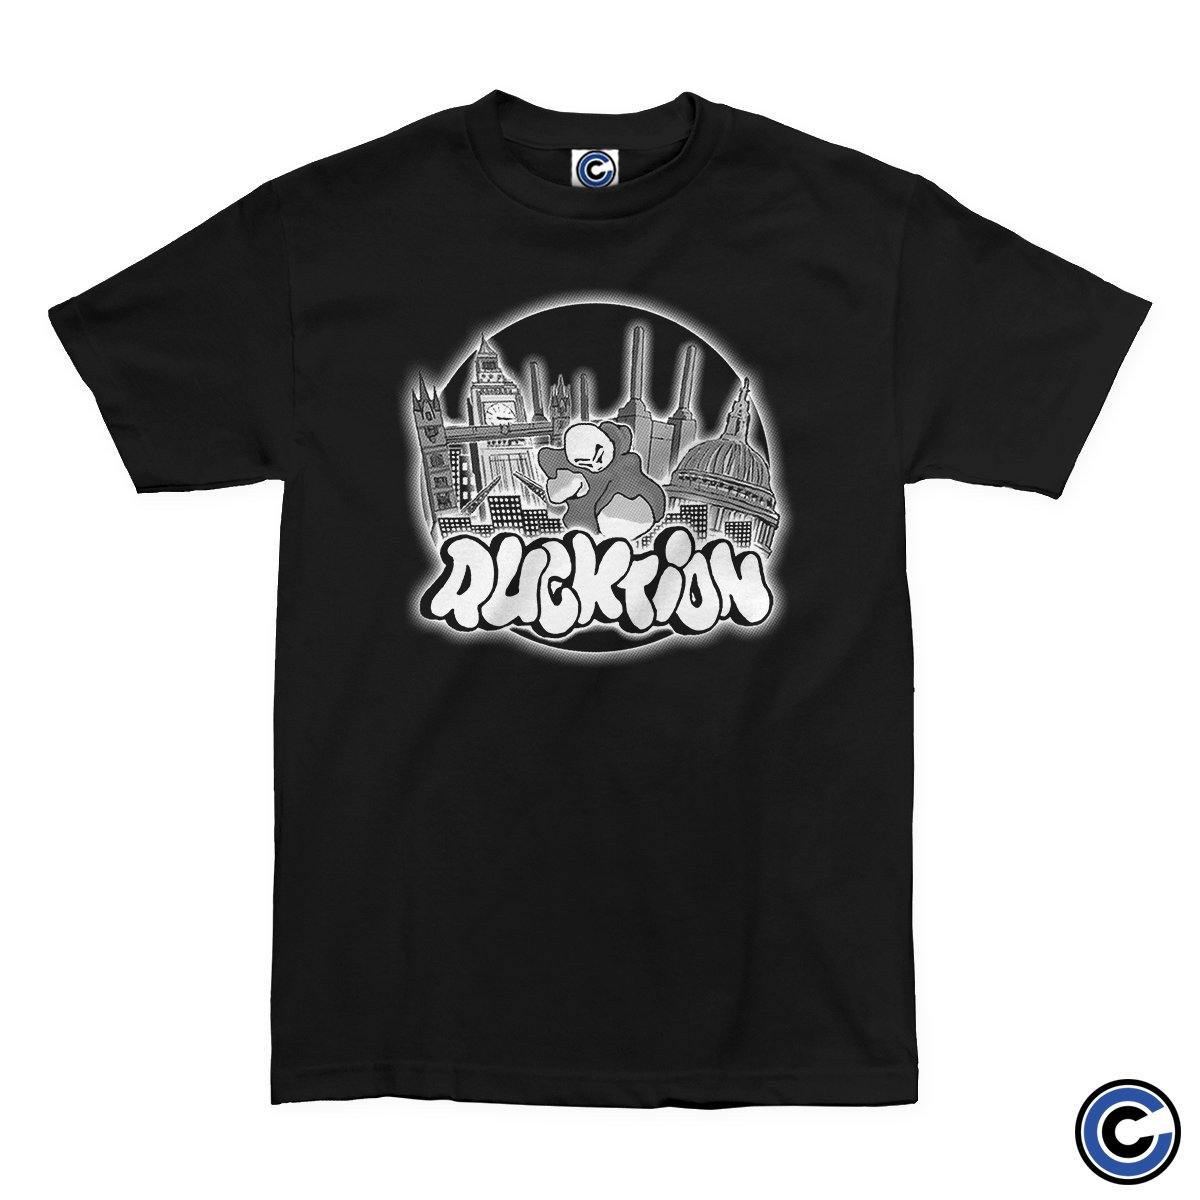 Buy – Rucktion Records "Rucktion City" Shirt – Band & Music Merch – Cold Cuts Merch